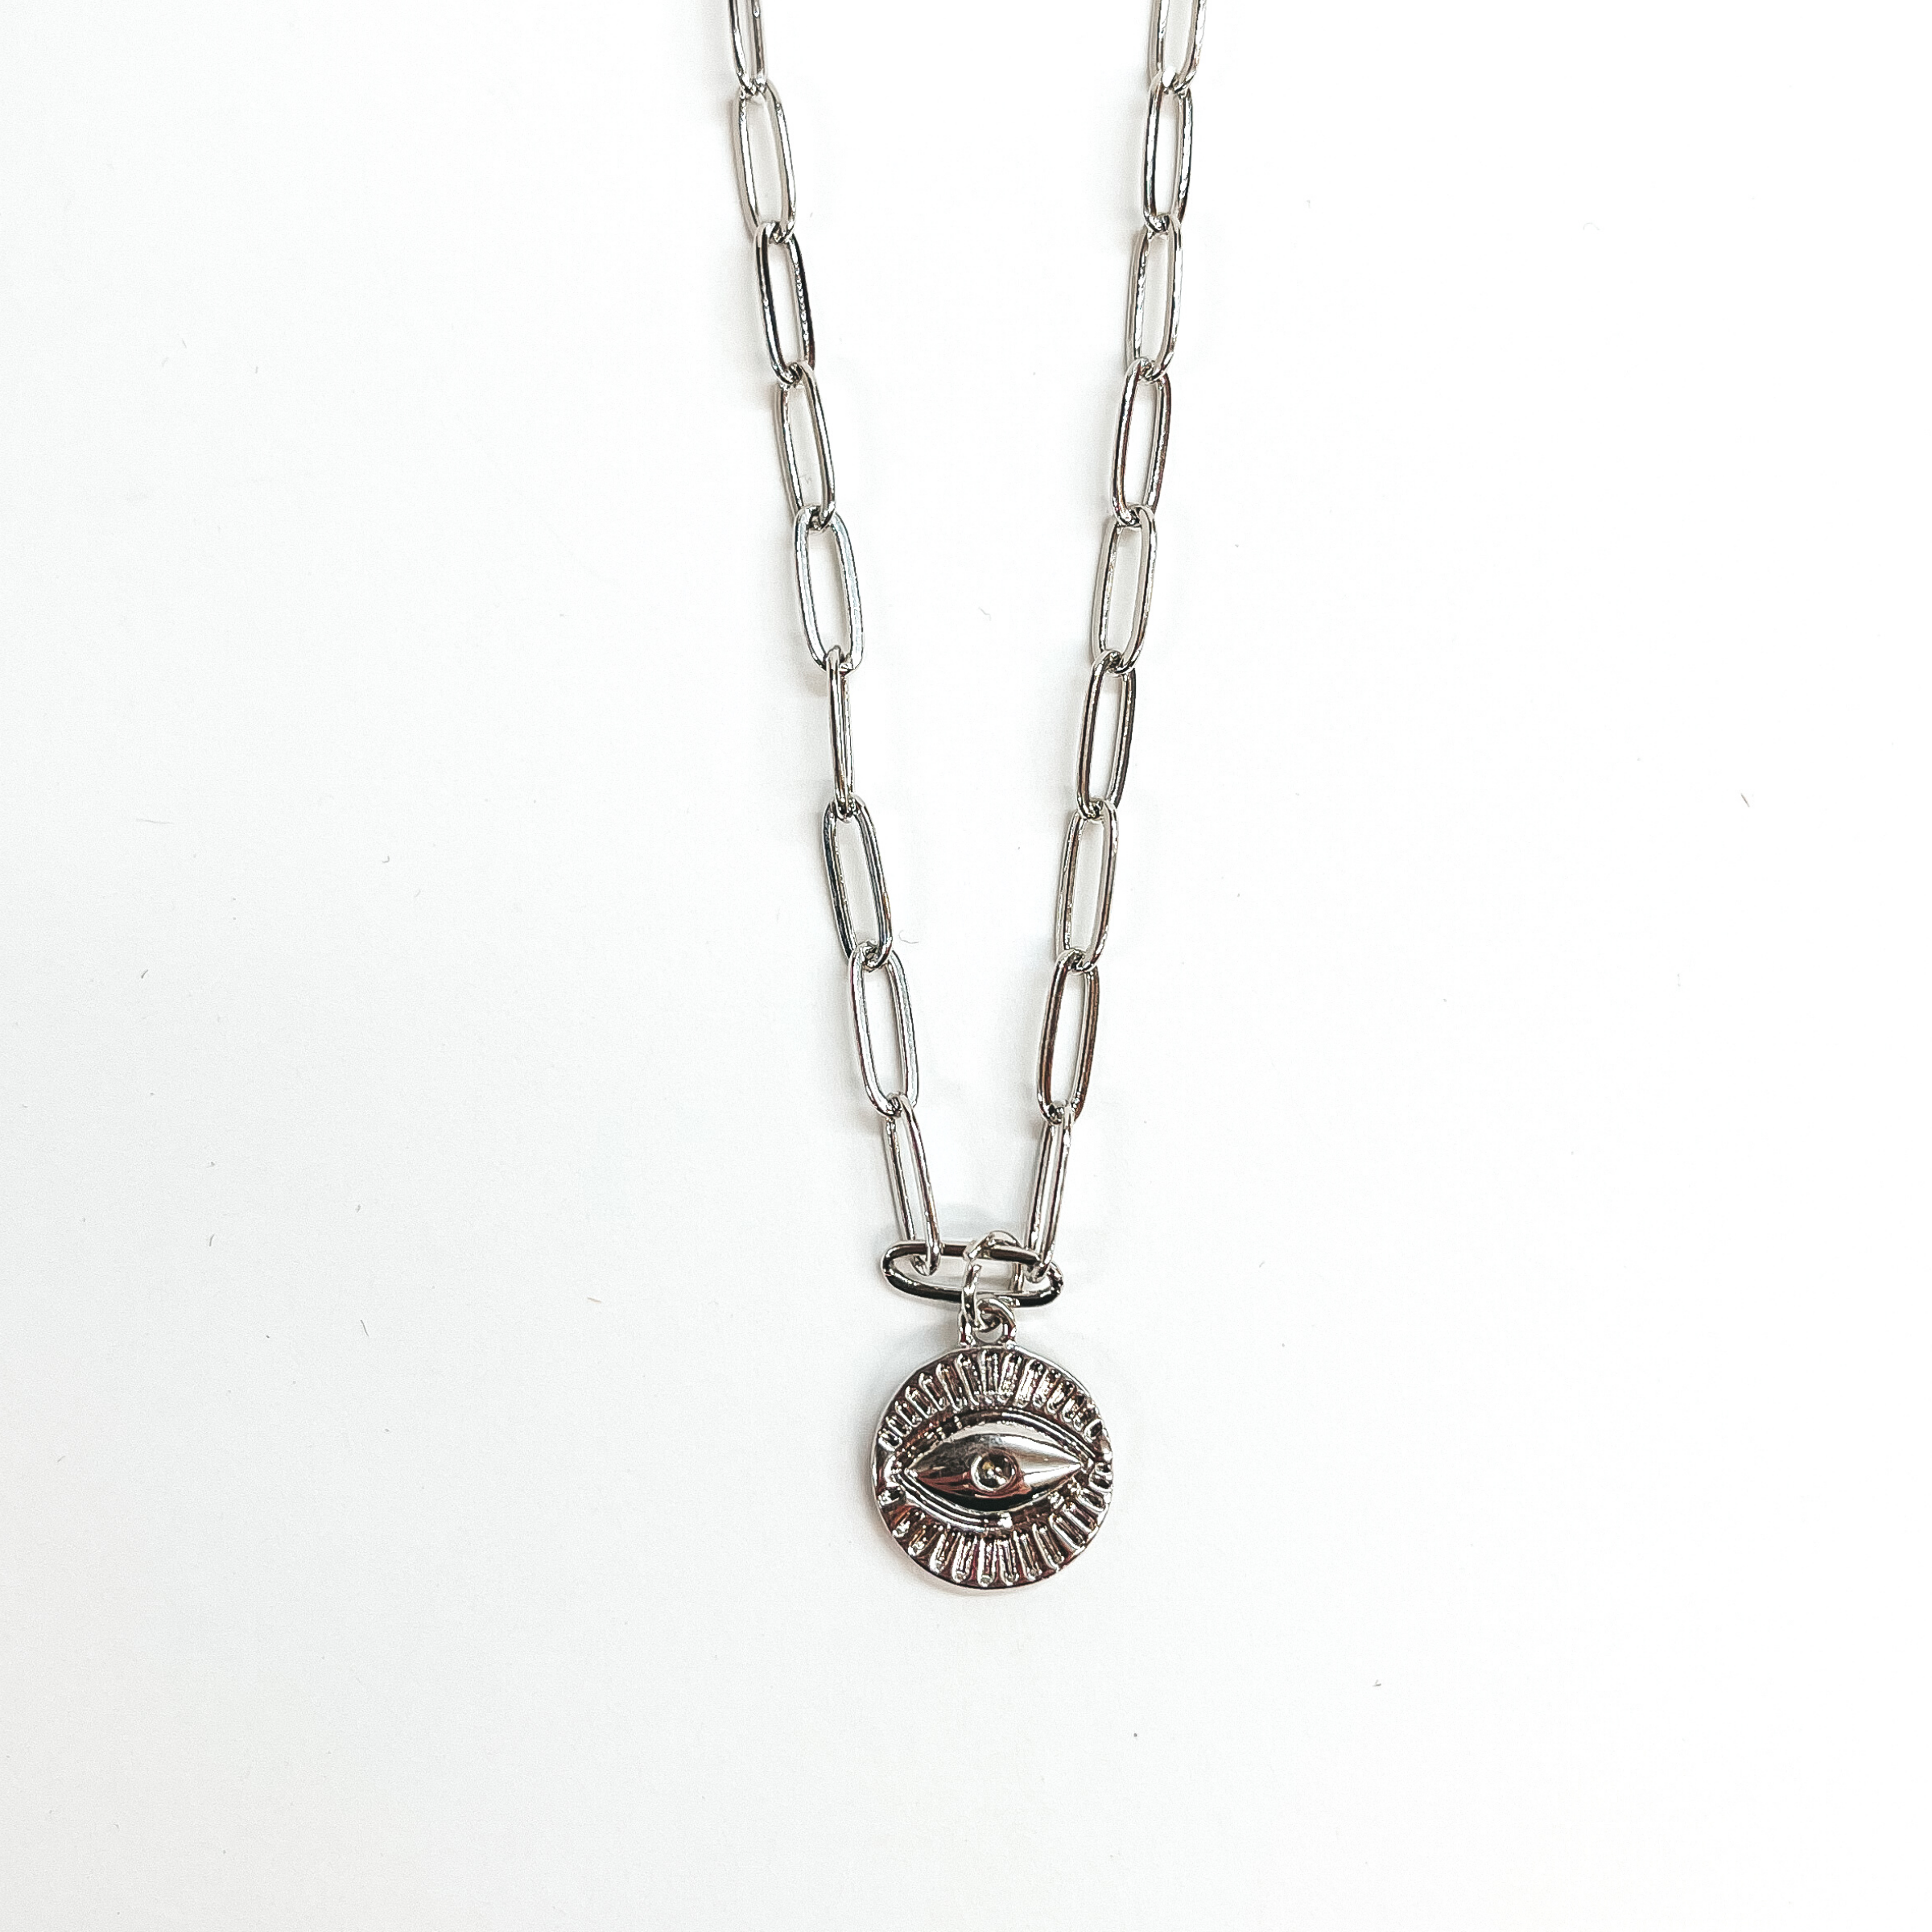 This is a silver paperclip chain necklace with a  silver evil eye pendant. This is taken on a white  background.